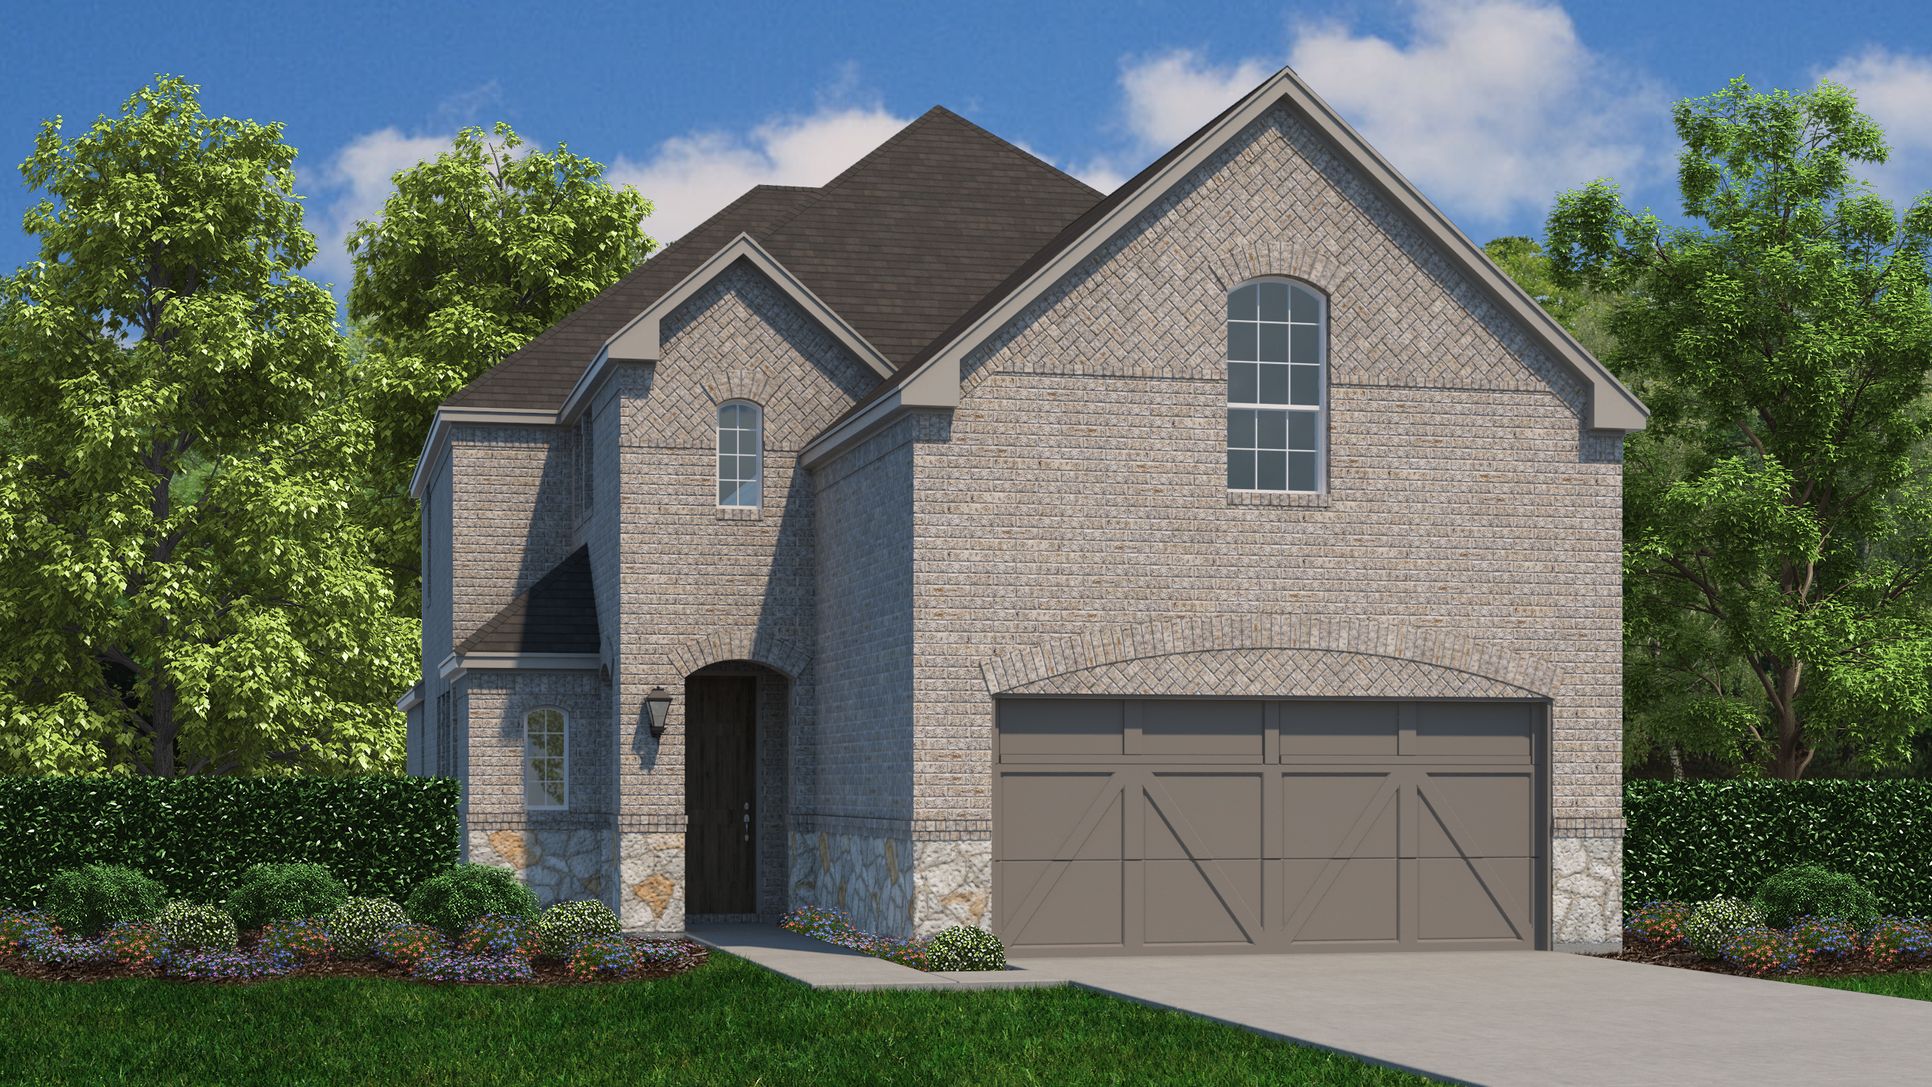 Exterior:Plan 1185 Elevation A with Stone